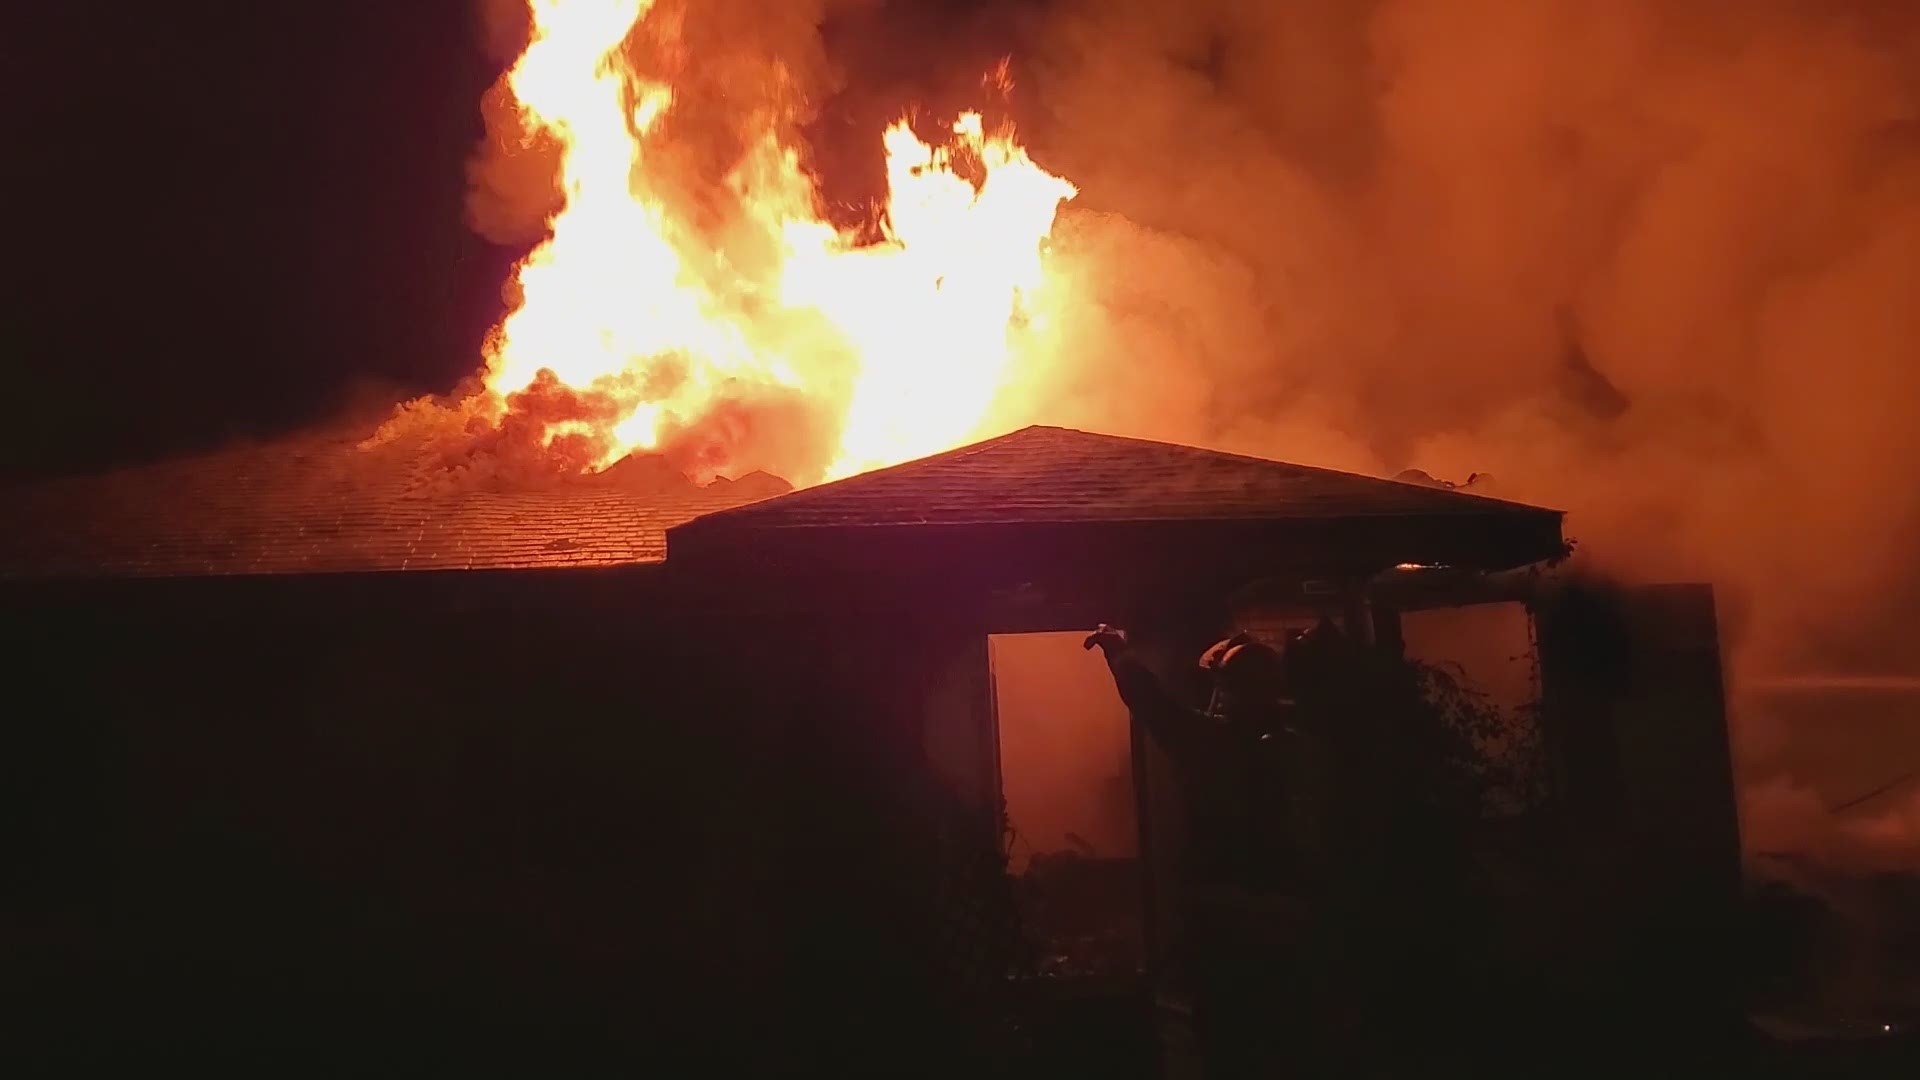 The St. Tammany Parish Fire Protection District No. 11 said the fire started around 11:51 p.m. Monday on Nelson Road in Pearl River.  No one was injured.